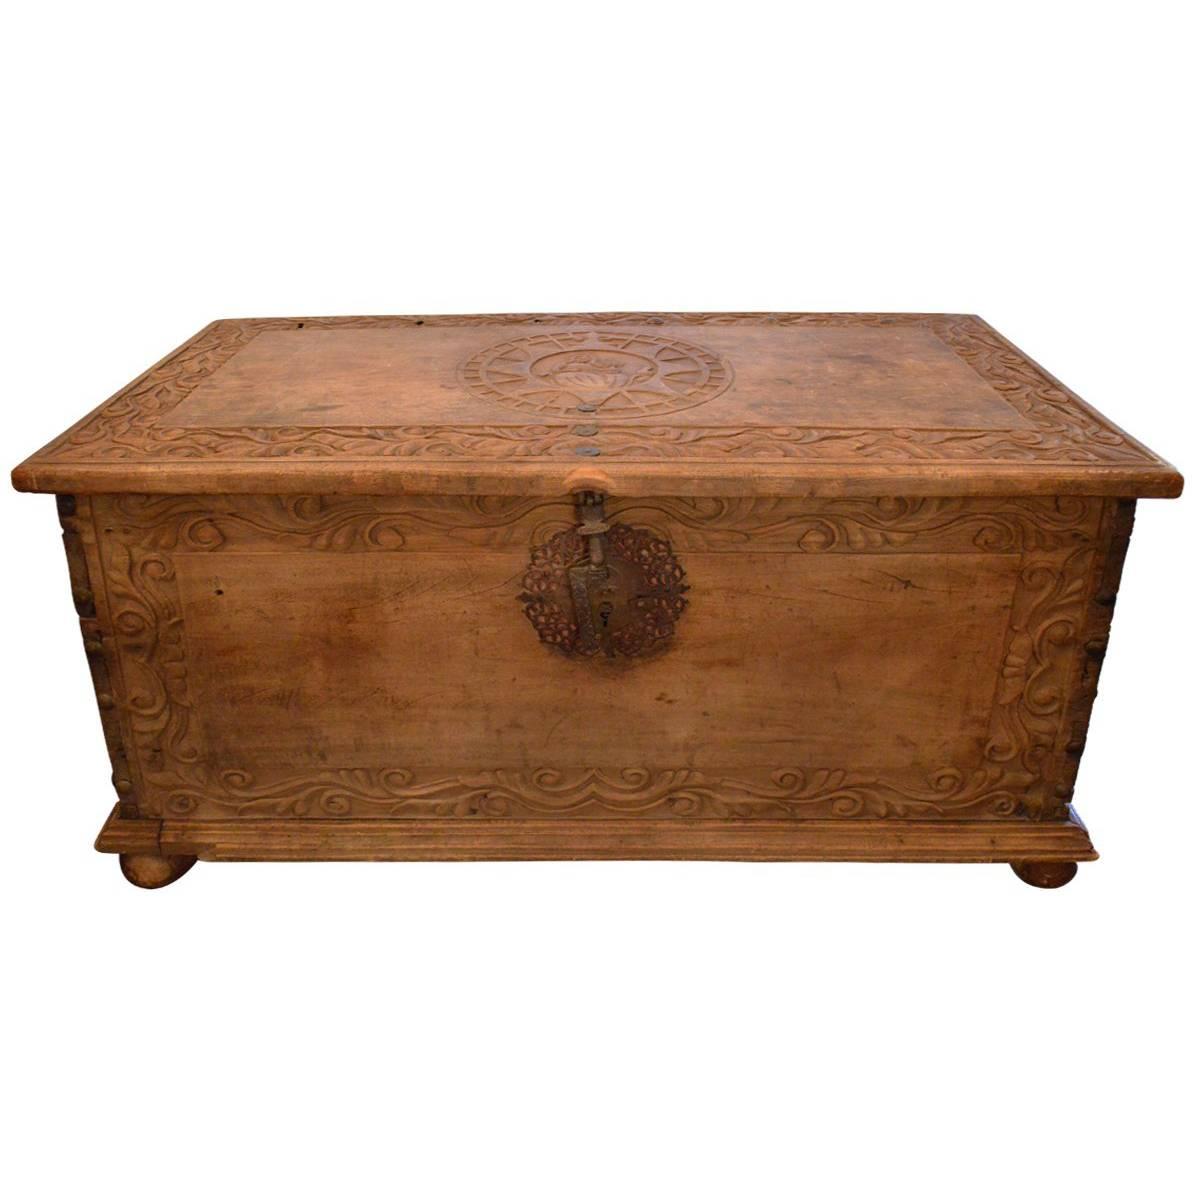 Large Antique 17th Century European Hand-Carved Wood Trunk/ Hope Chest For Sale